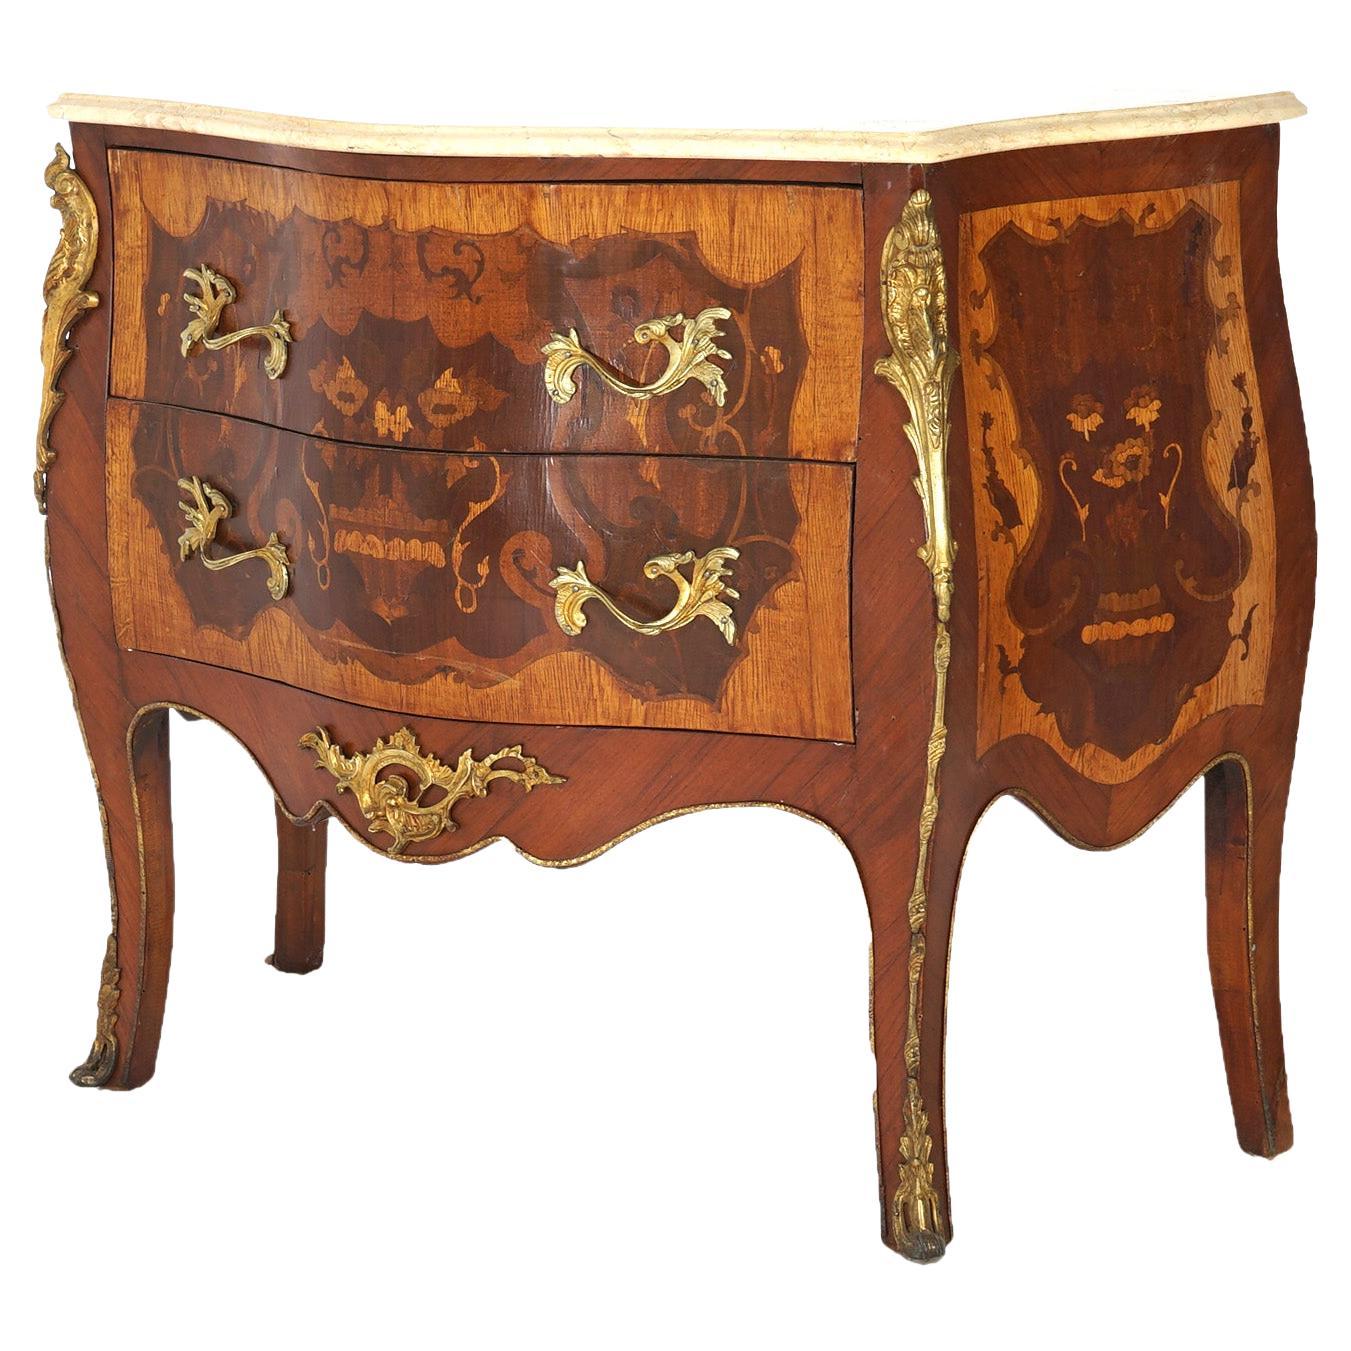 Antique Louis XV Style Marble, Ormolu, Satinwood & Kingwood Inlaid Commode 20thC For Sale